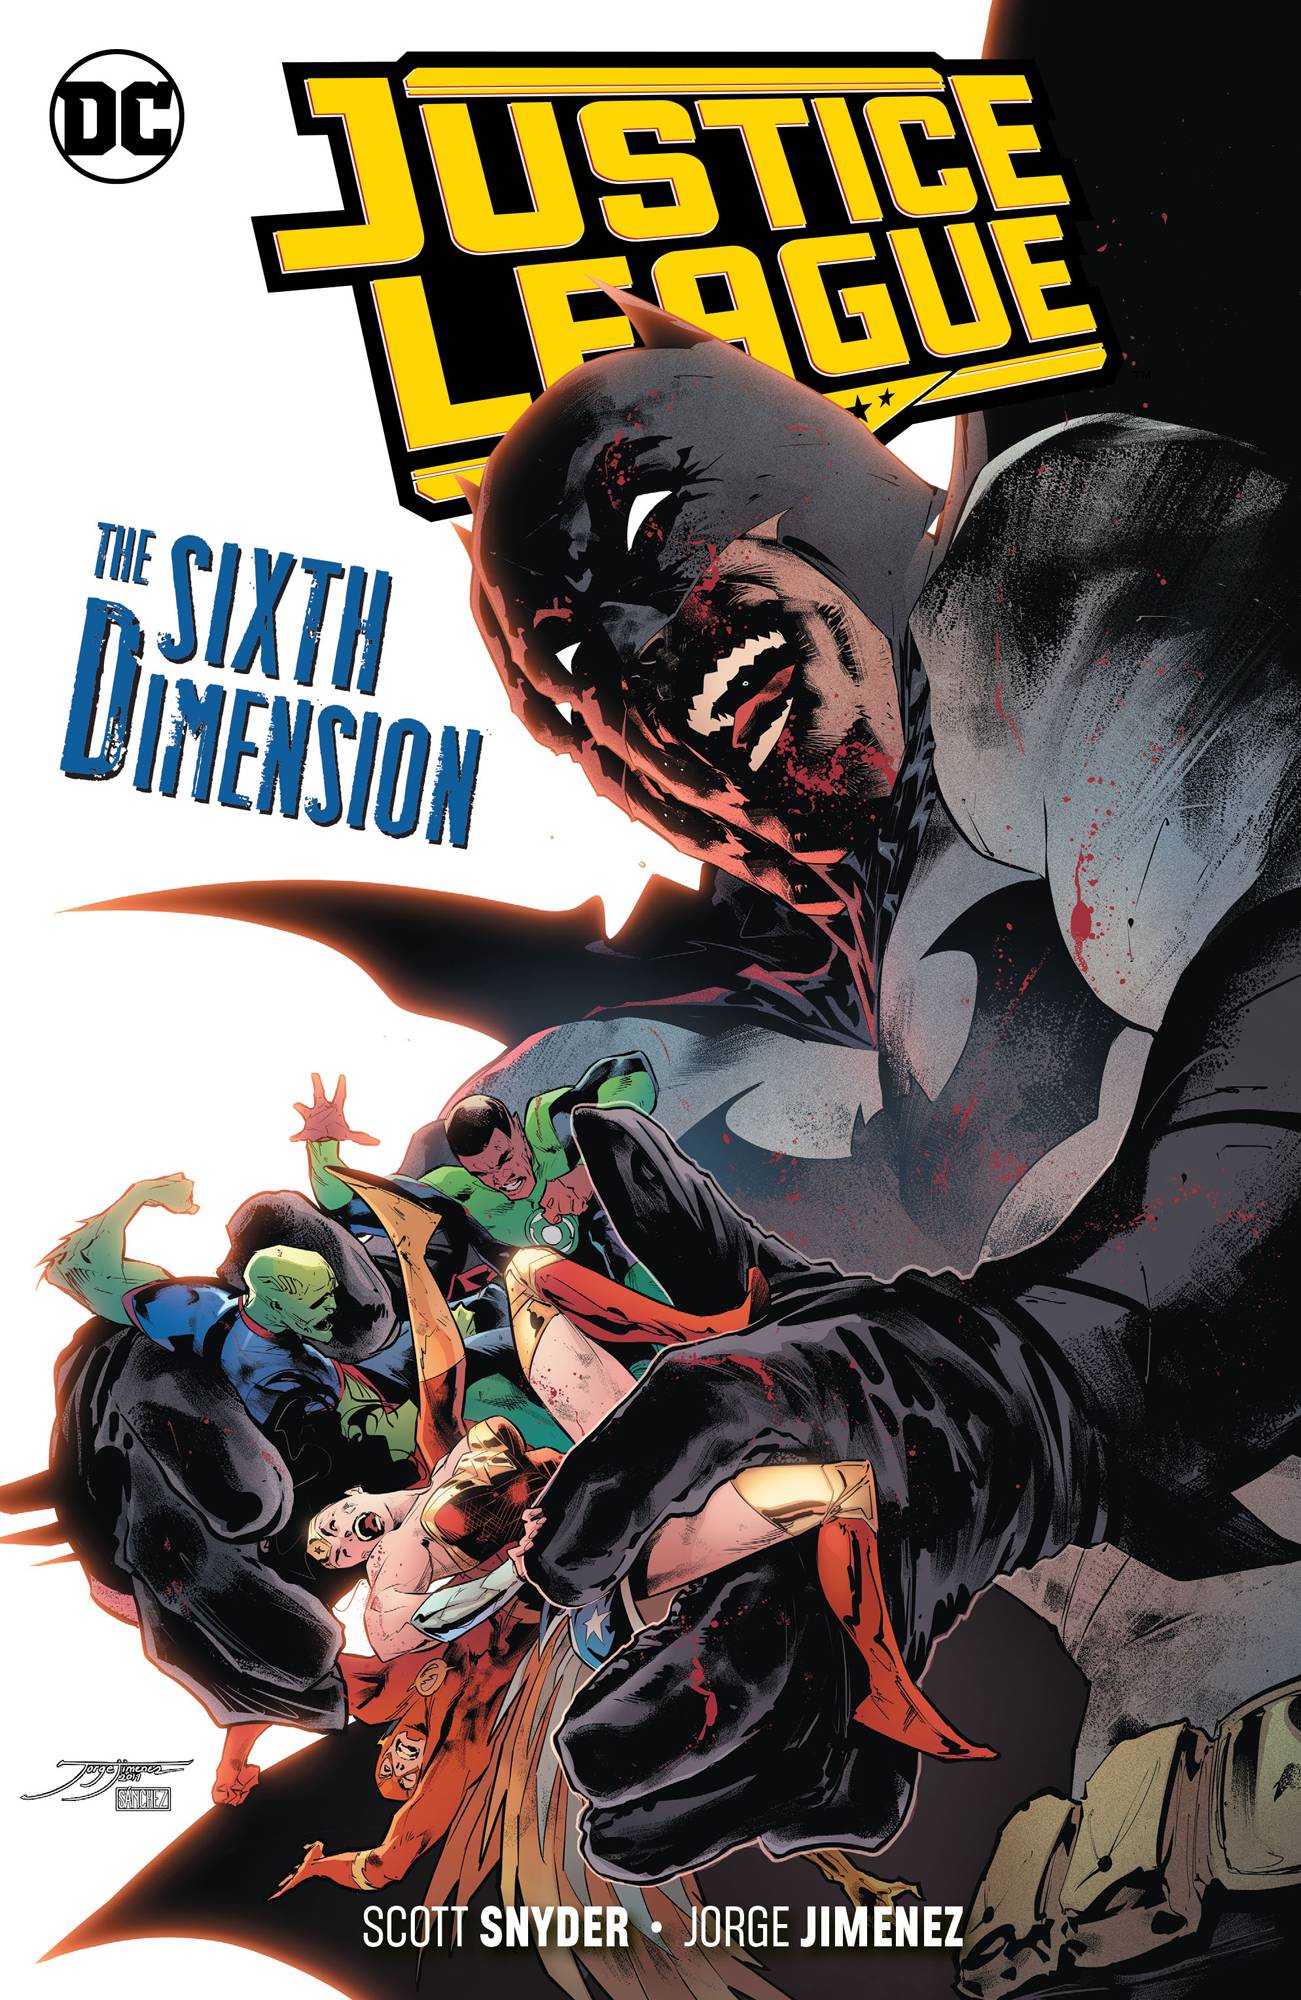 Justice League Graphic Novel Volume 4 The Sixth Dimension